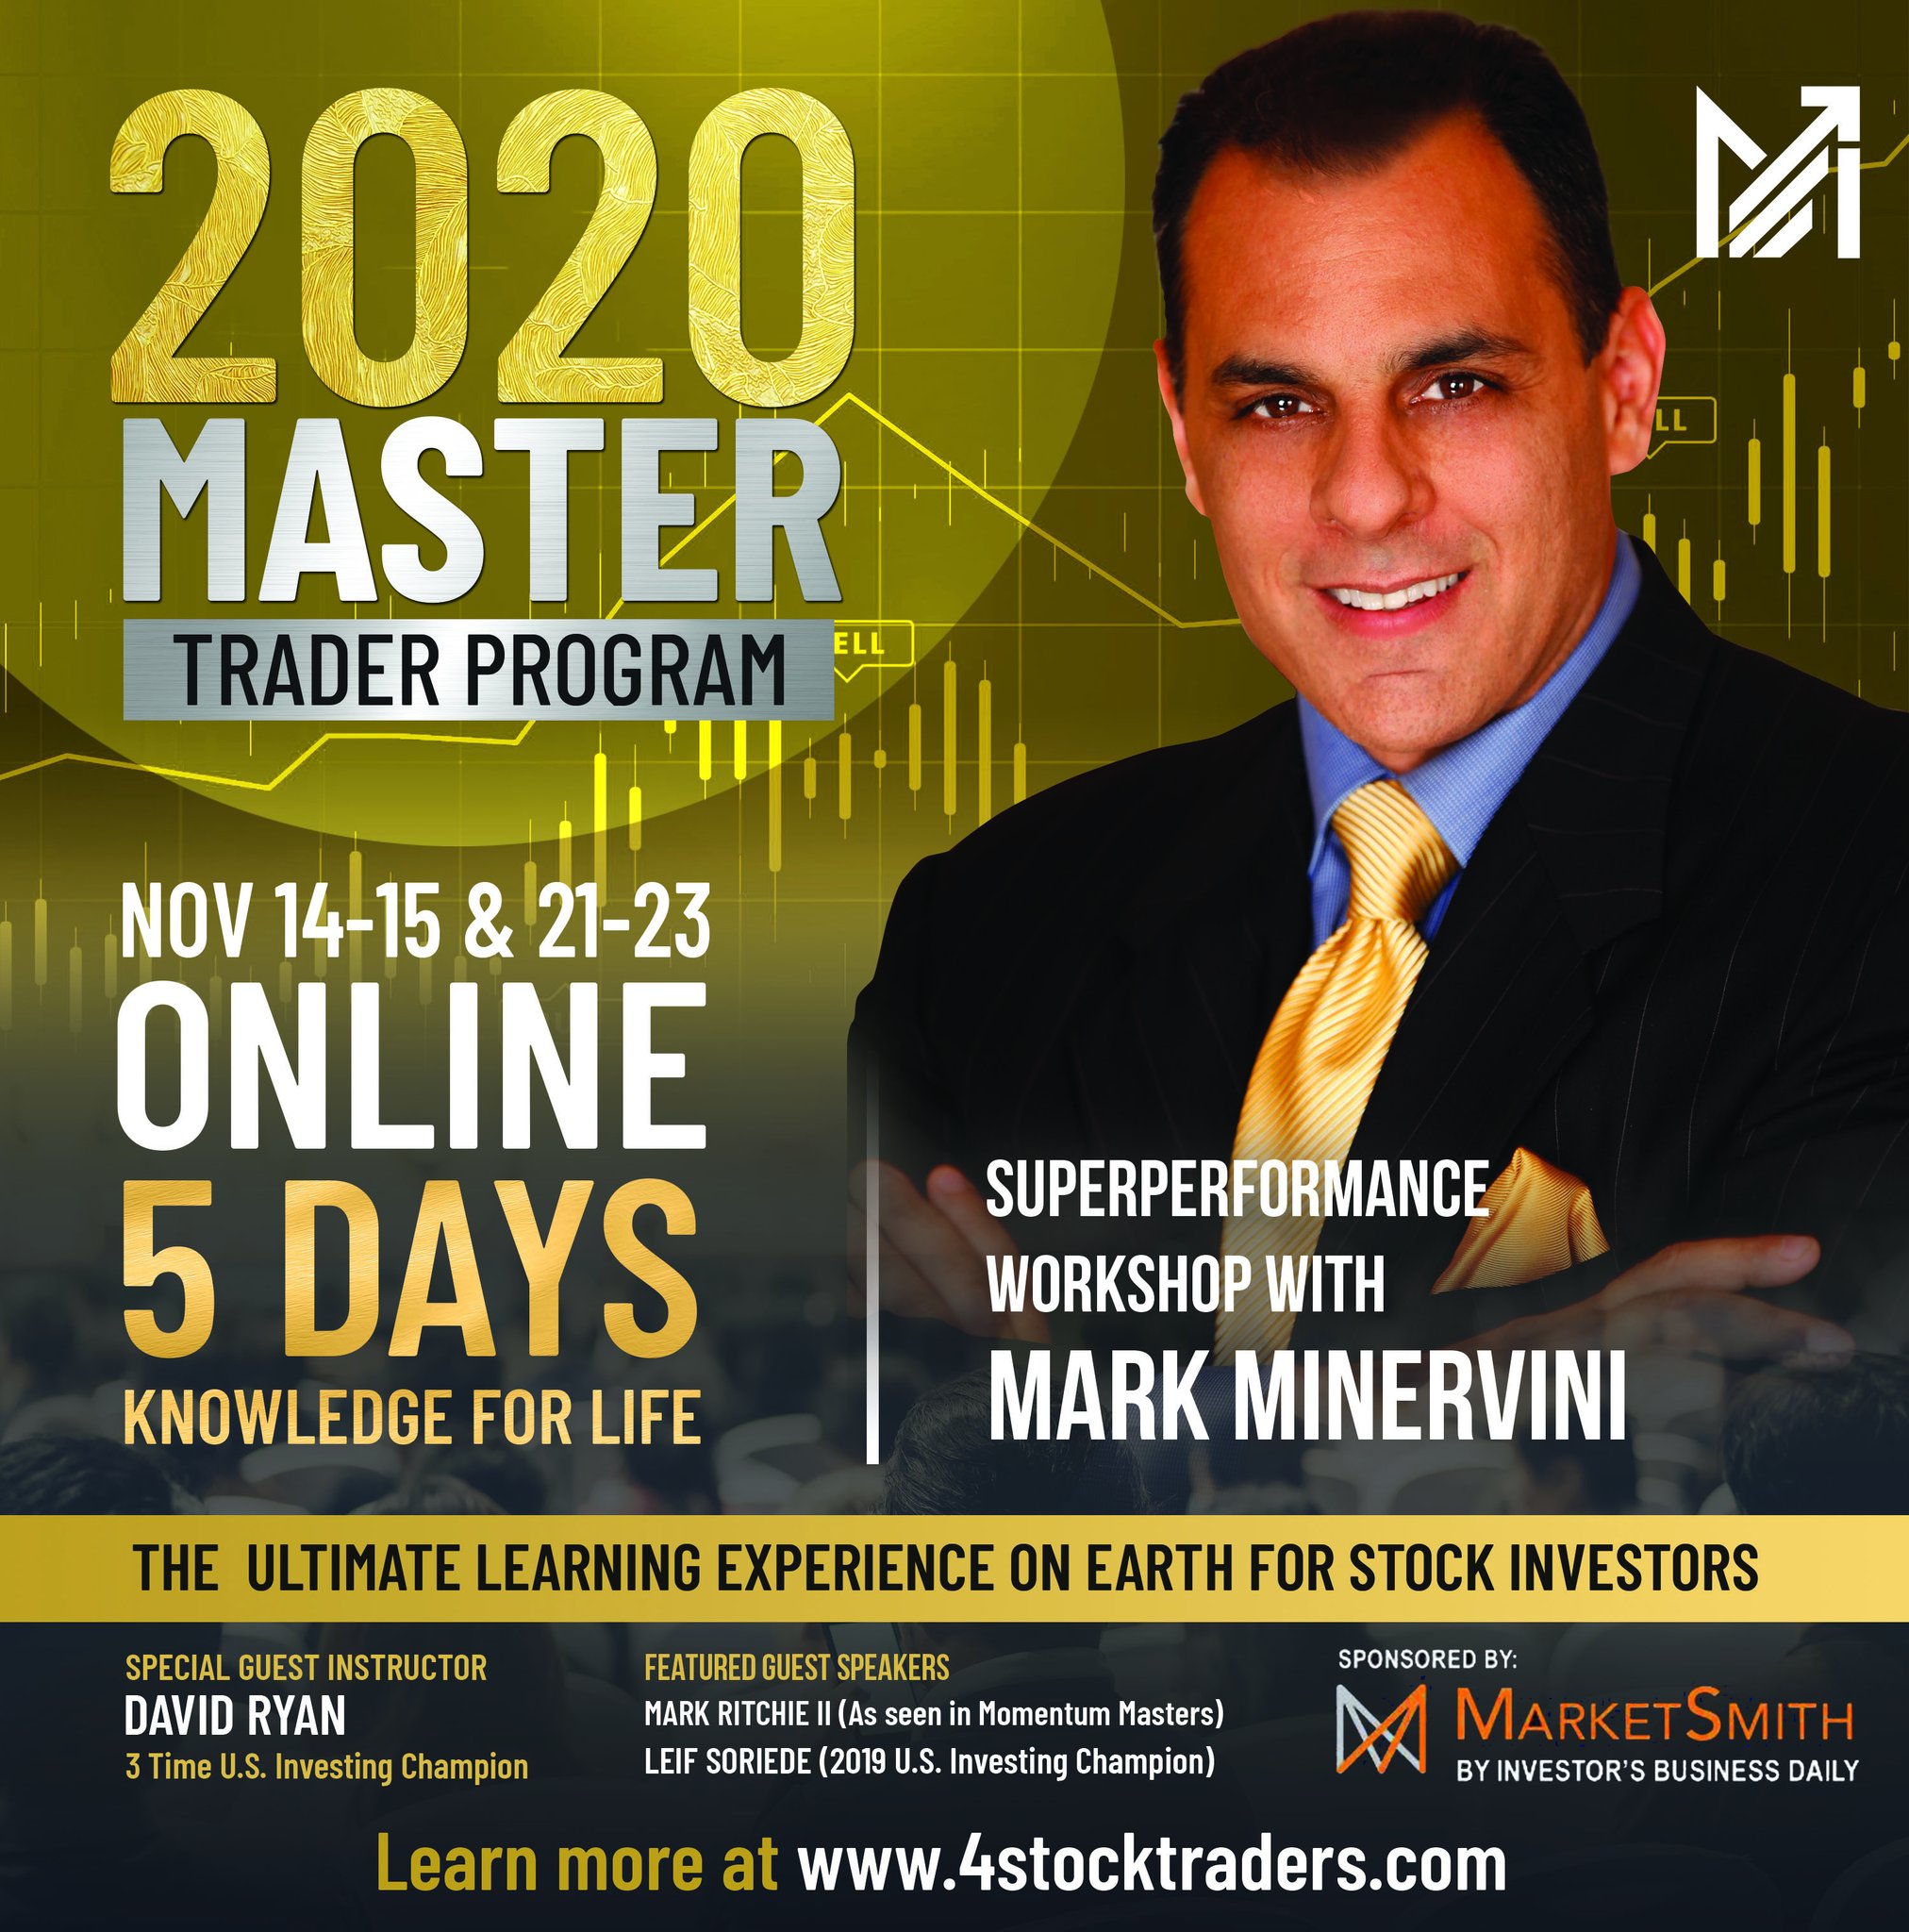 Mark Minervini على تويتر: &quot;2020 Master Trader Program is going online!  Dramatically improve your trading results. Same curriculum as in-person  event. +450 page workbook mailed to you. Register Now!  https://t.co/if3fjjCmfg… https://t.co/KubDq5kJLM&quot;